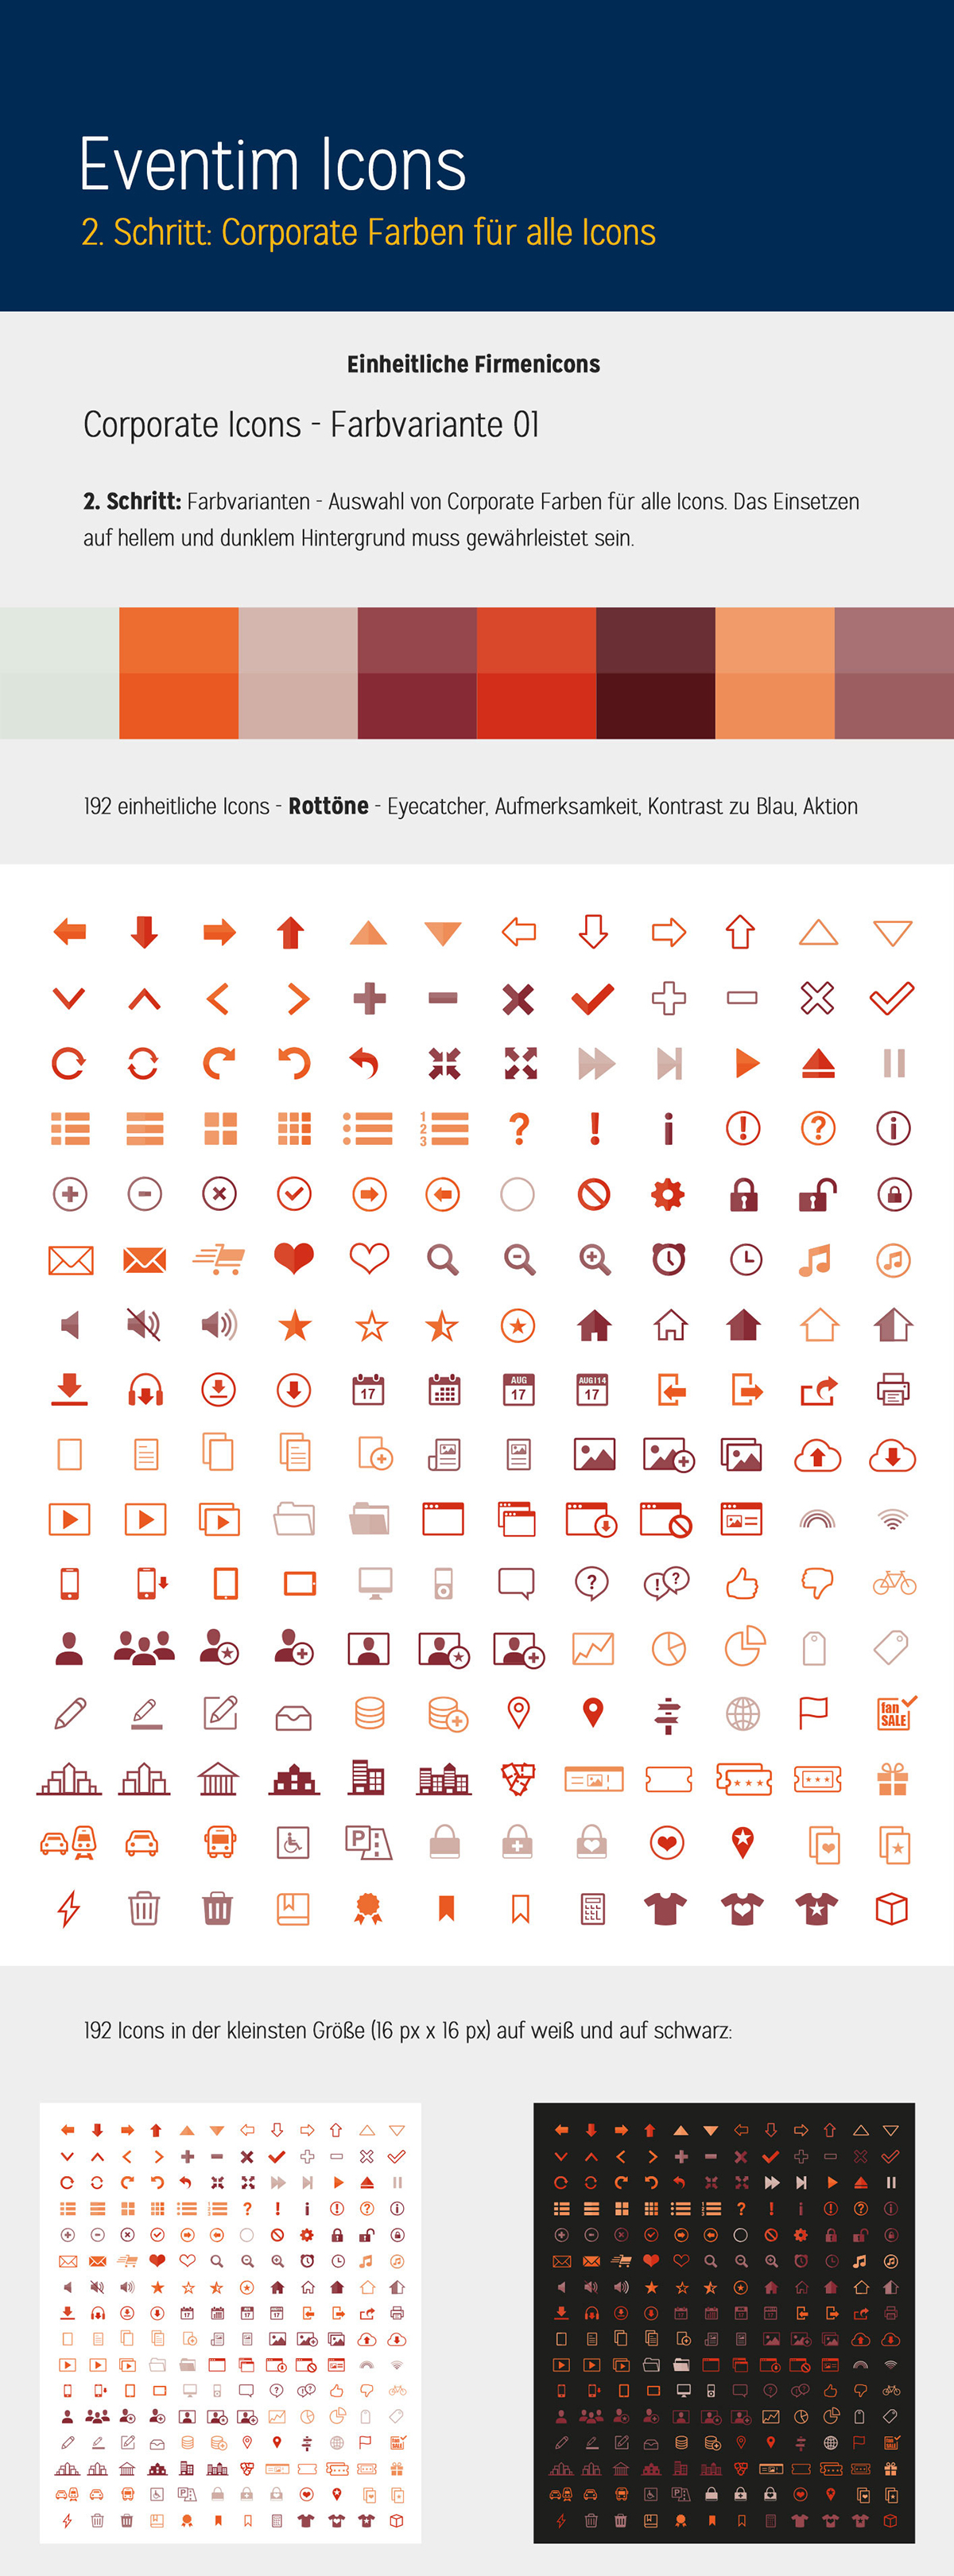 icons Online shop shop redesign corporate design Collection